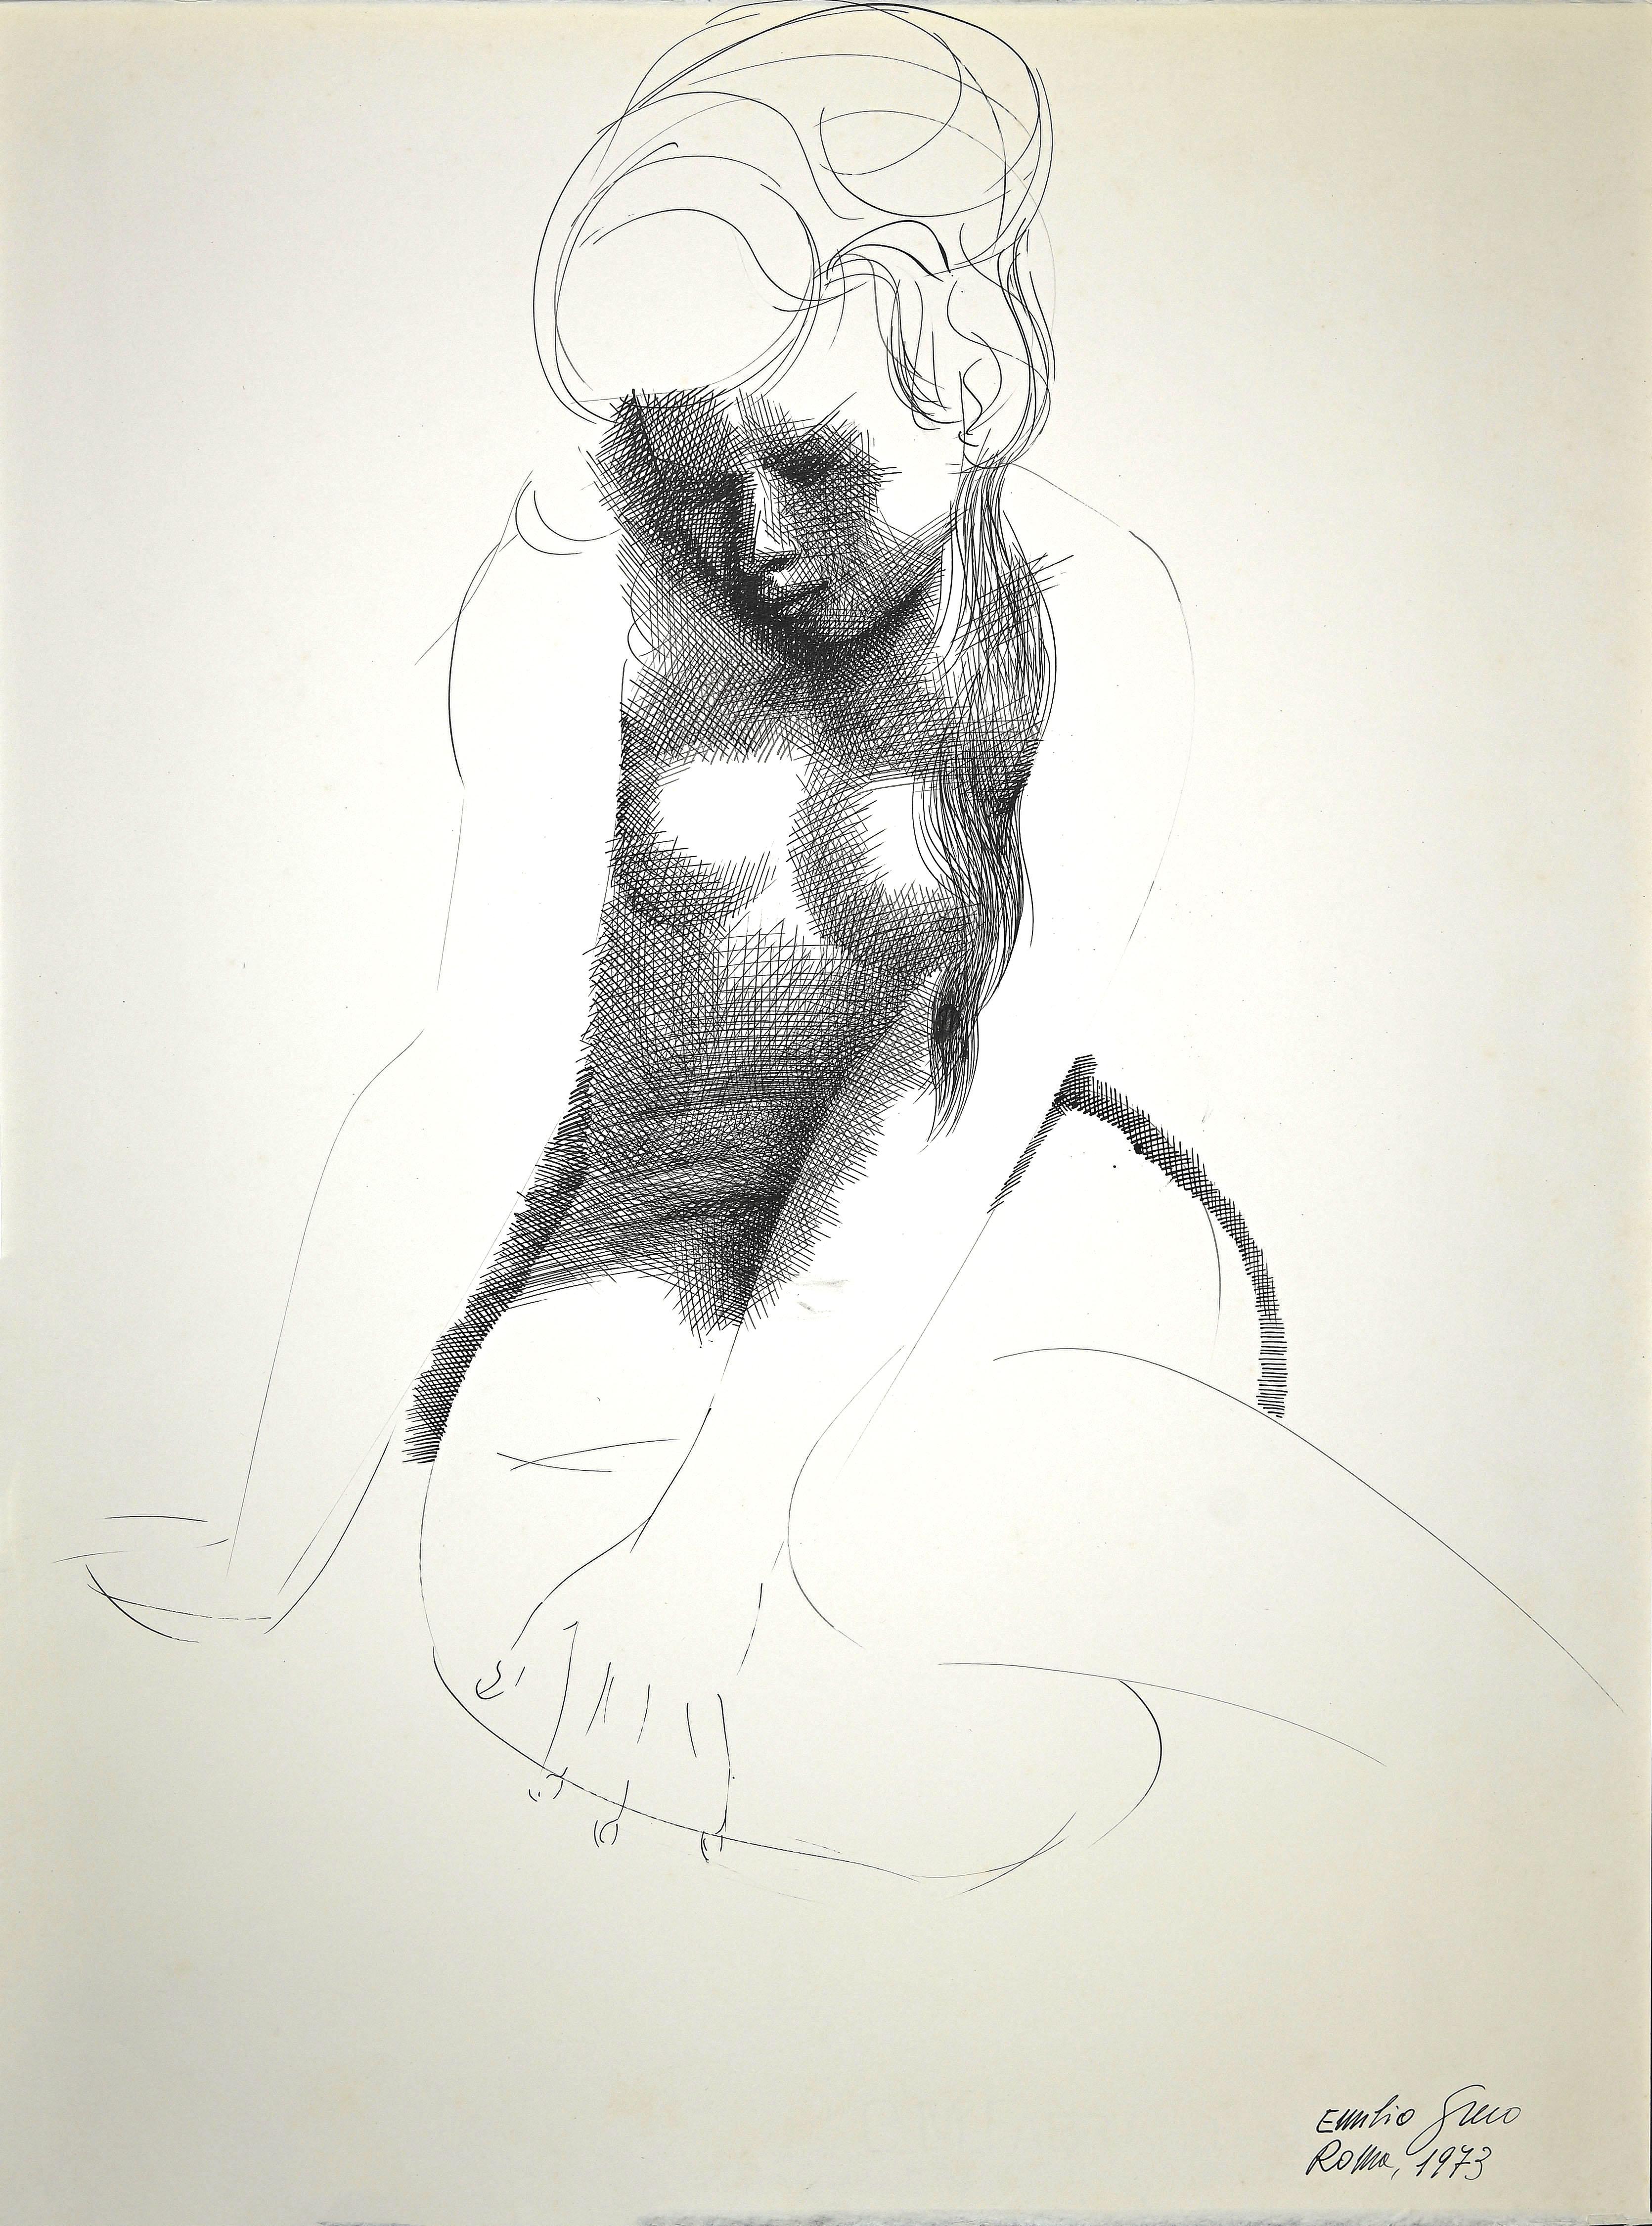 Nude of Woman - China Ink Drawing by E. Greco - 1973